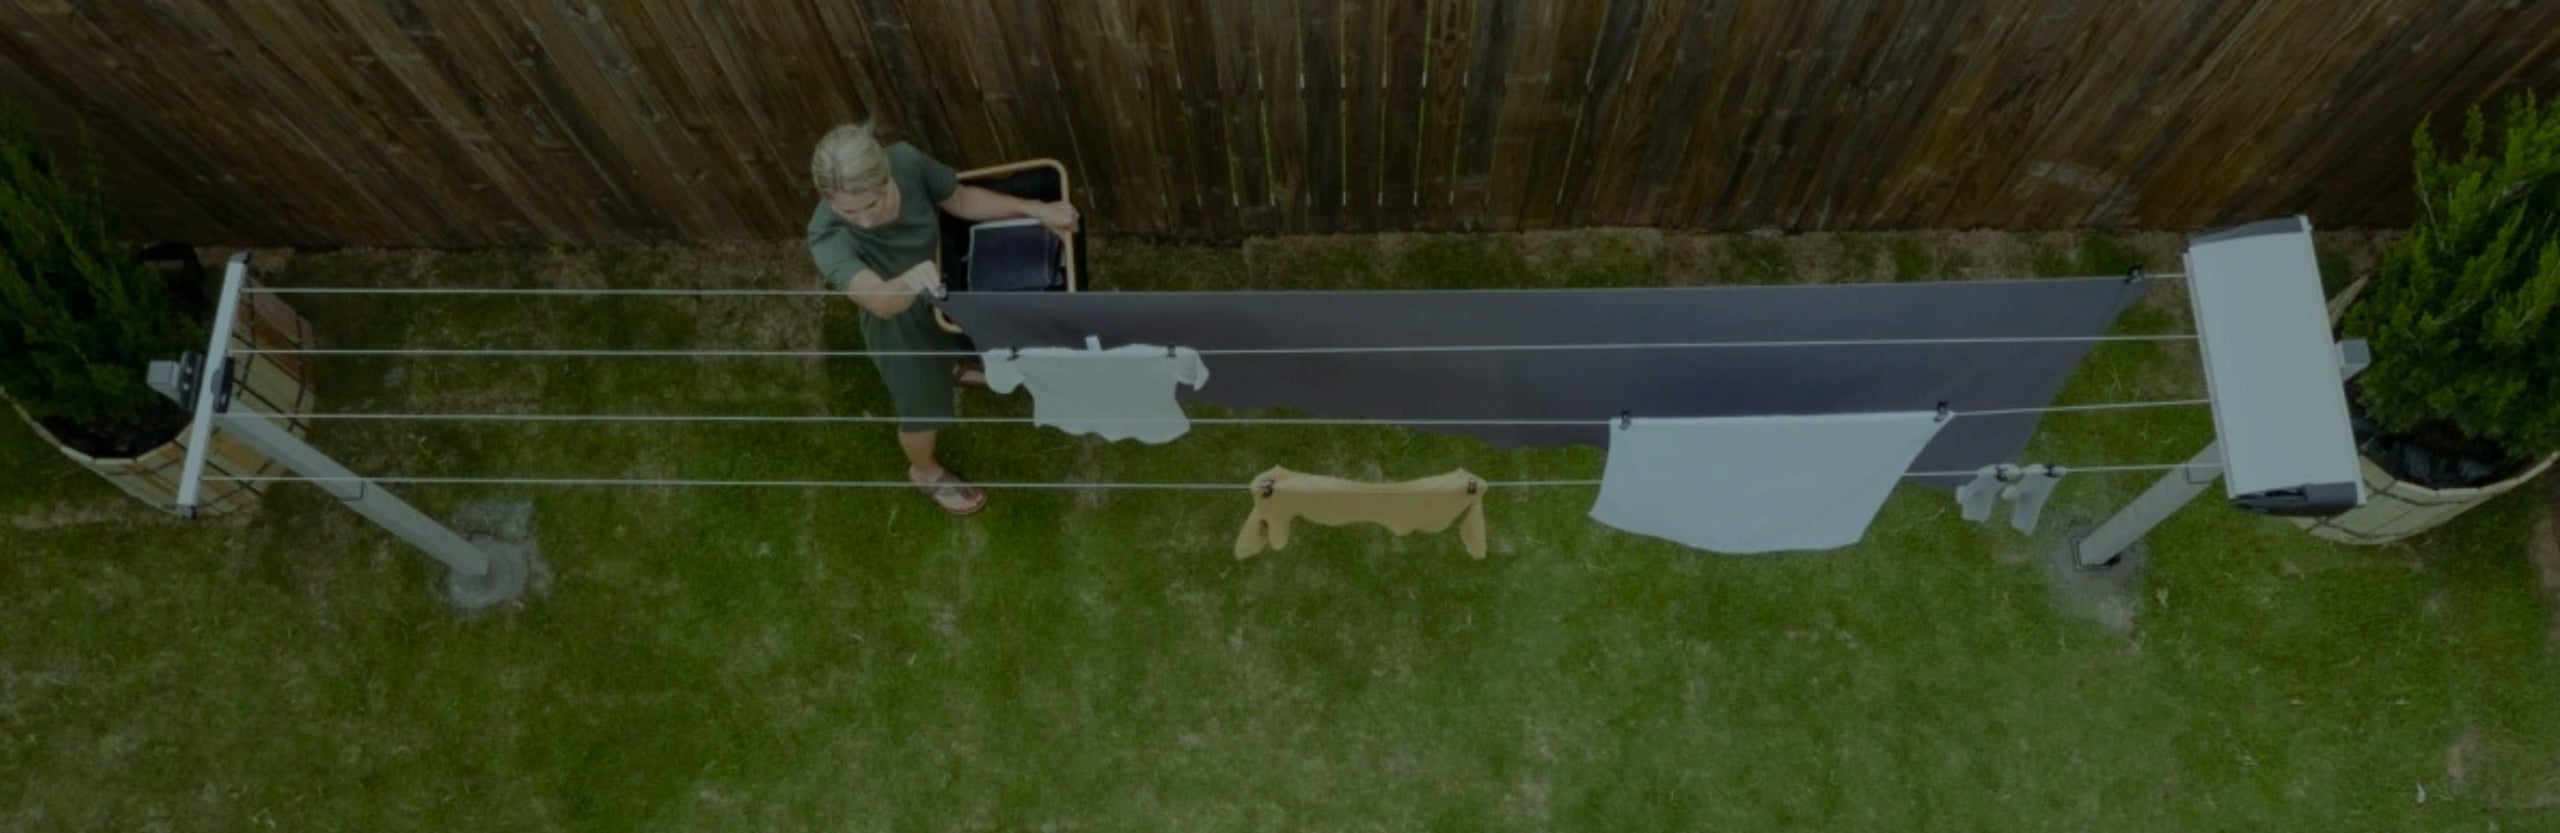 Retractable Clothesline - Free Delivery or Installation – Lifestyle  Clotheslines